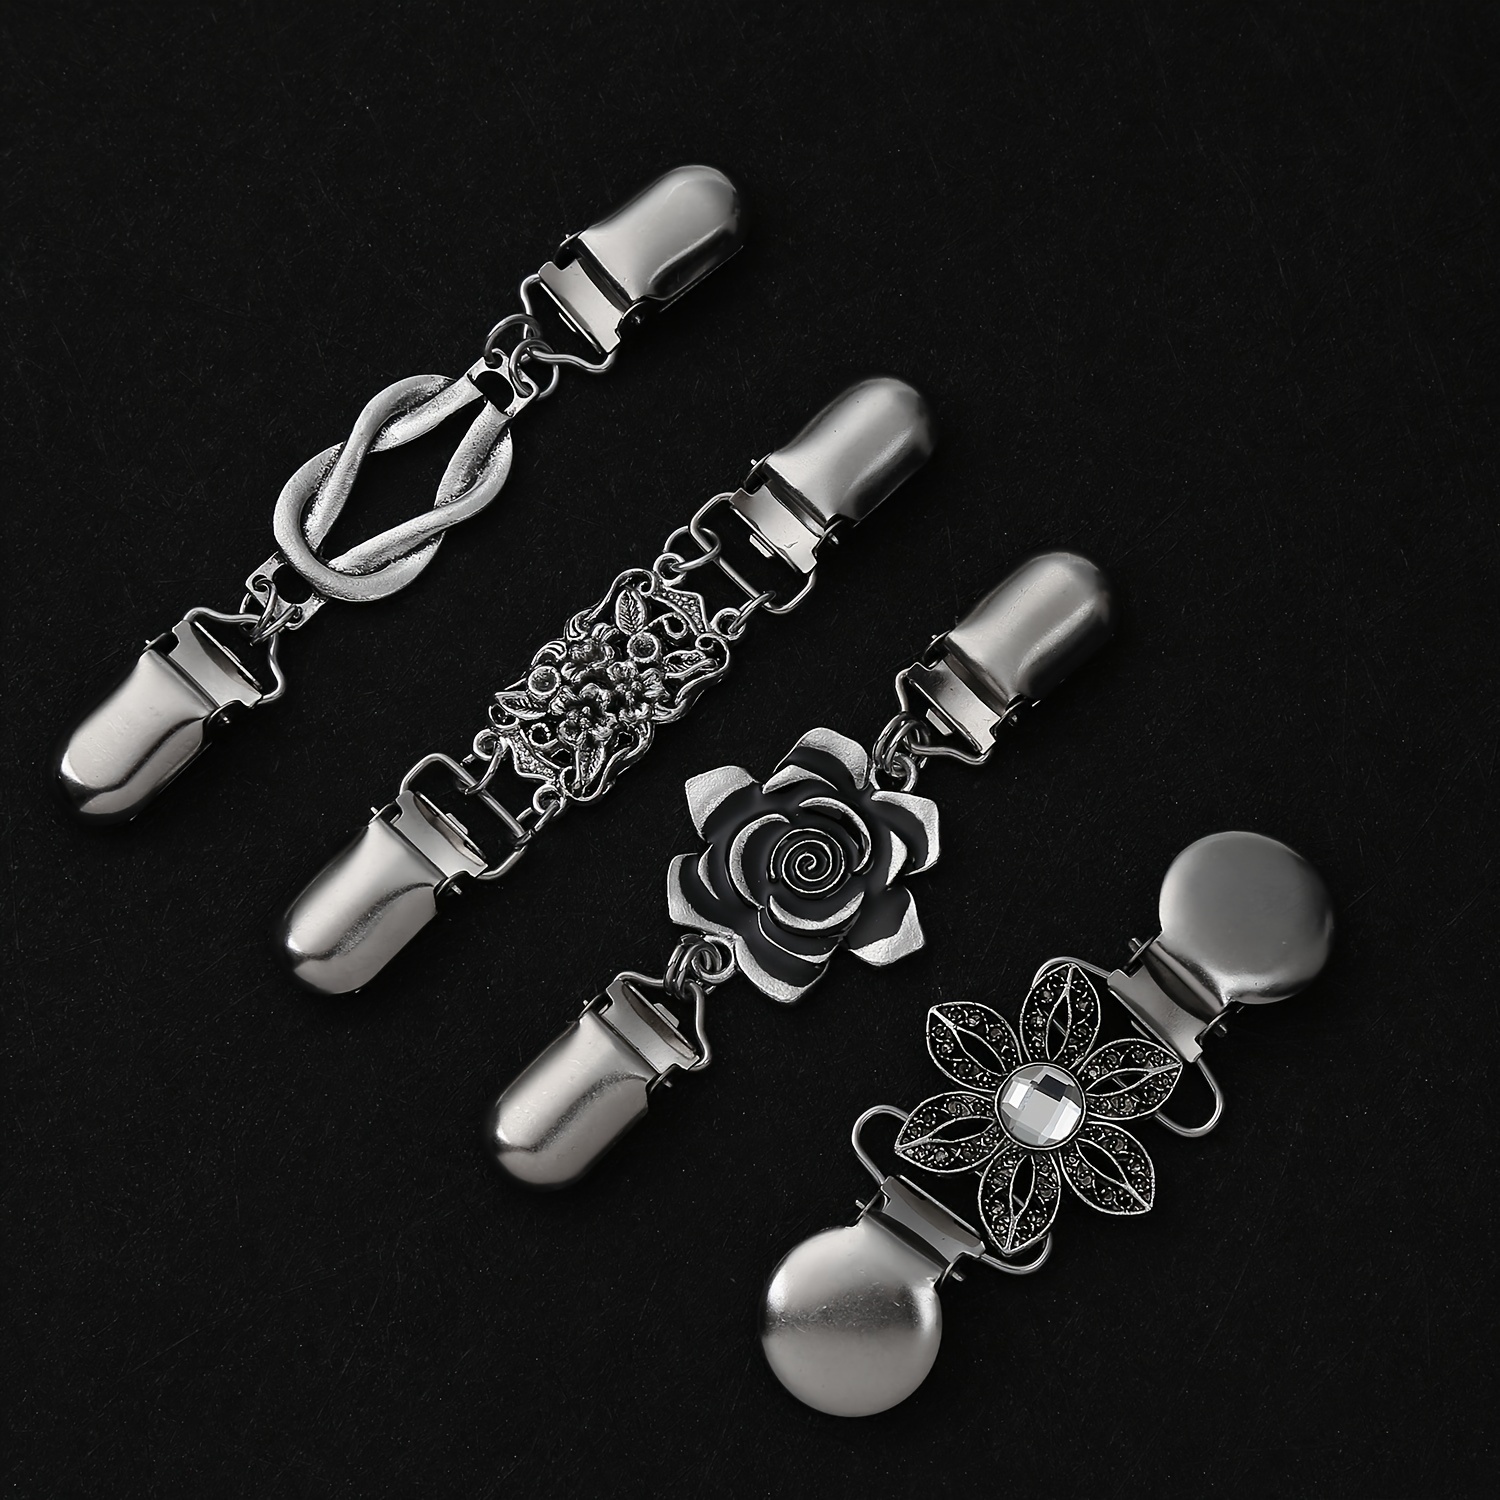 4pcs Vintage Silvery Metal Sweater Clip Cardigan Clip For Women Shawl Clips